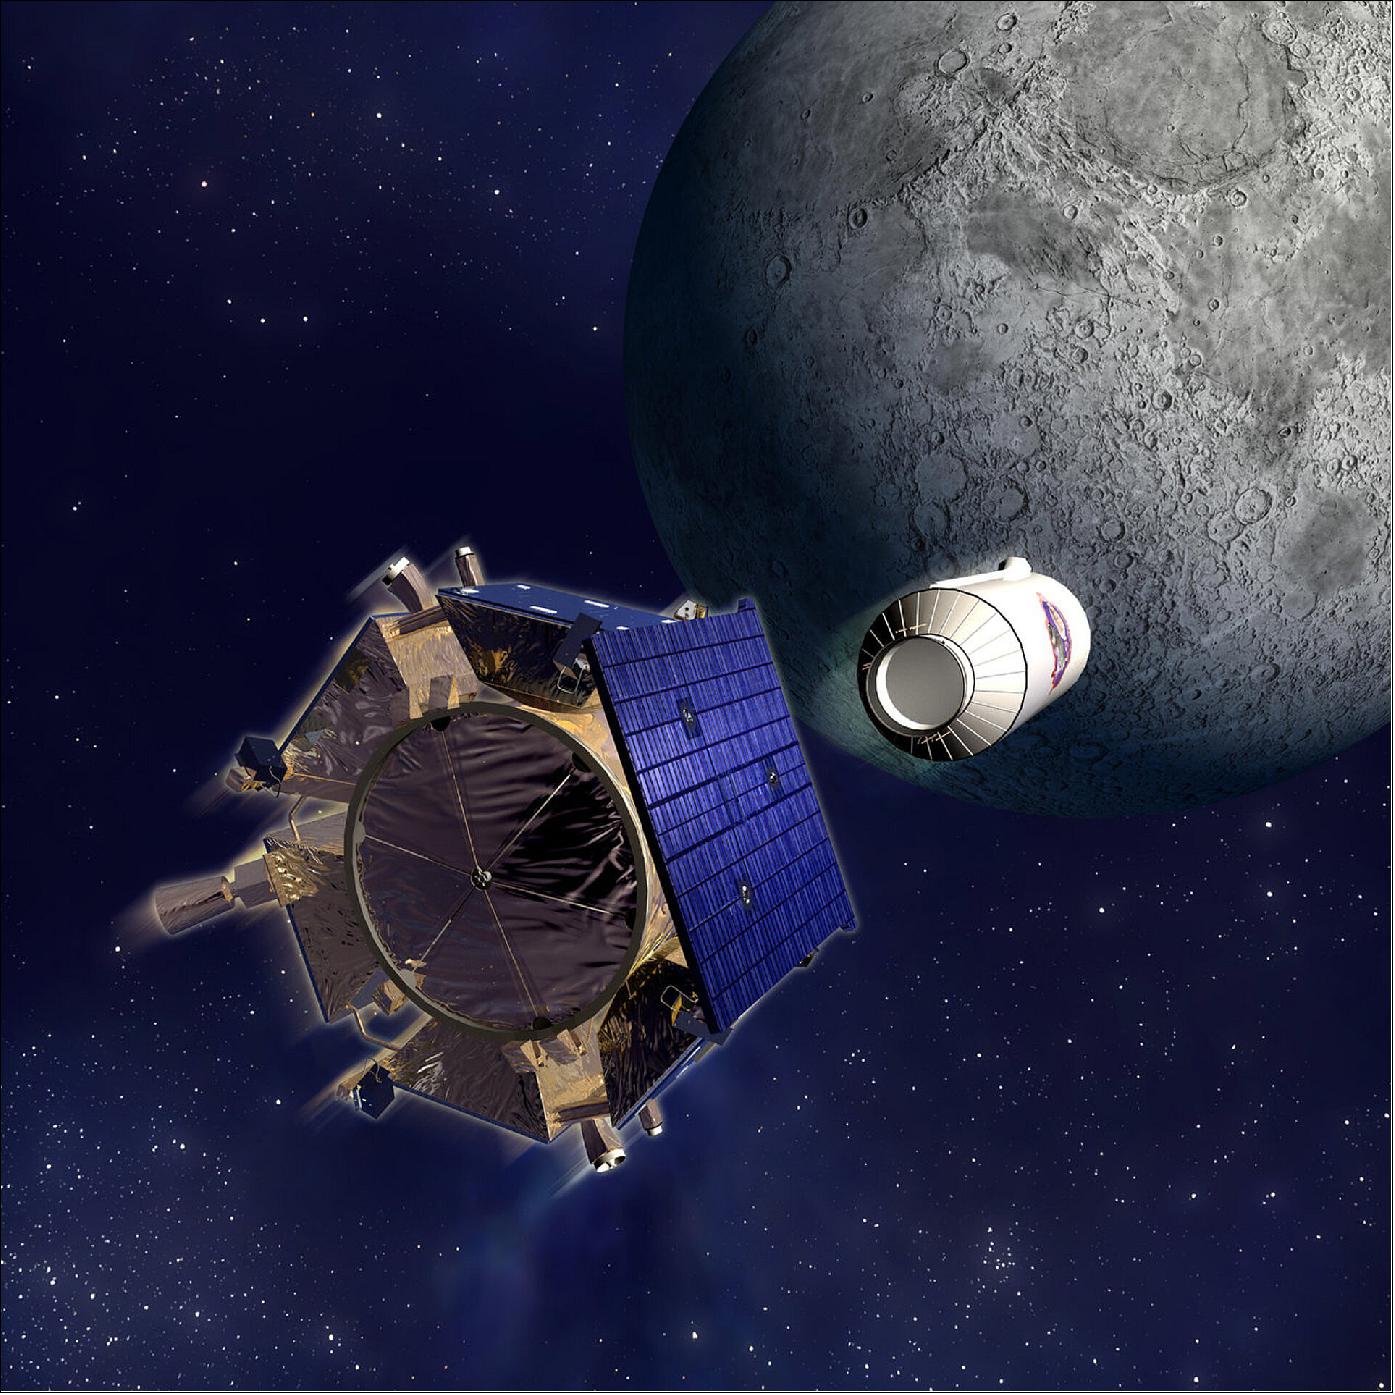 Figure 5: NASA's LCROSS impacting the Moon. In 2009 NASA's LCROSS mission deployed a Centaur upper stage to intentionally impact the Moon before going on to crash into the lunar surface itself. The resulting debris plumes were observed from Earth, revealing water ice and other volatiles (image credit: NASA)